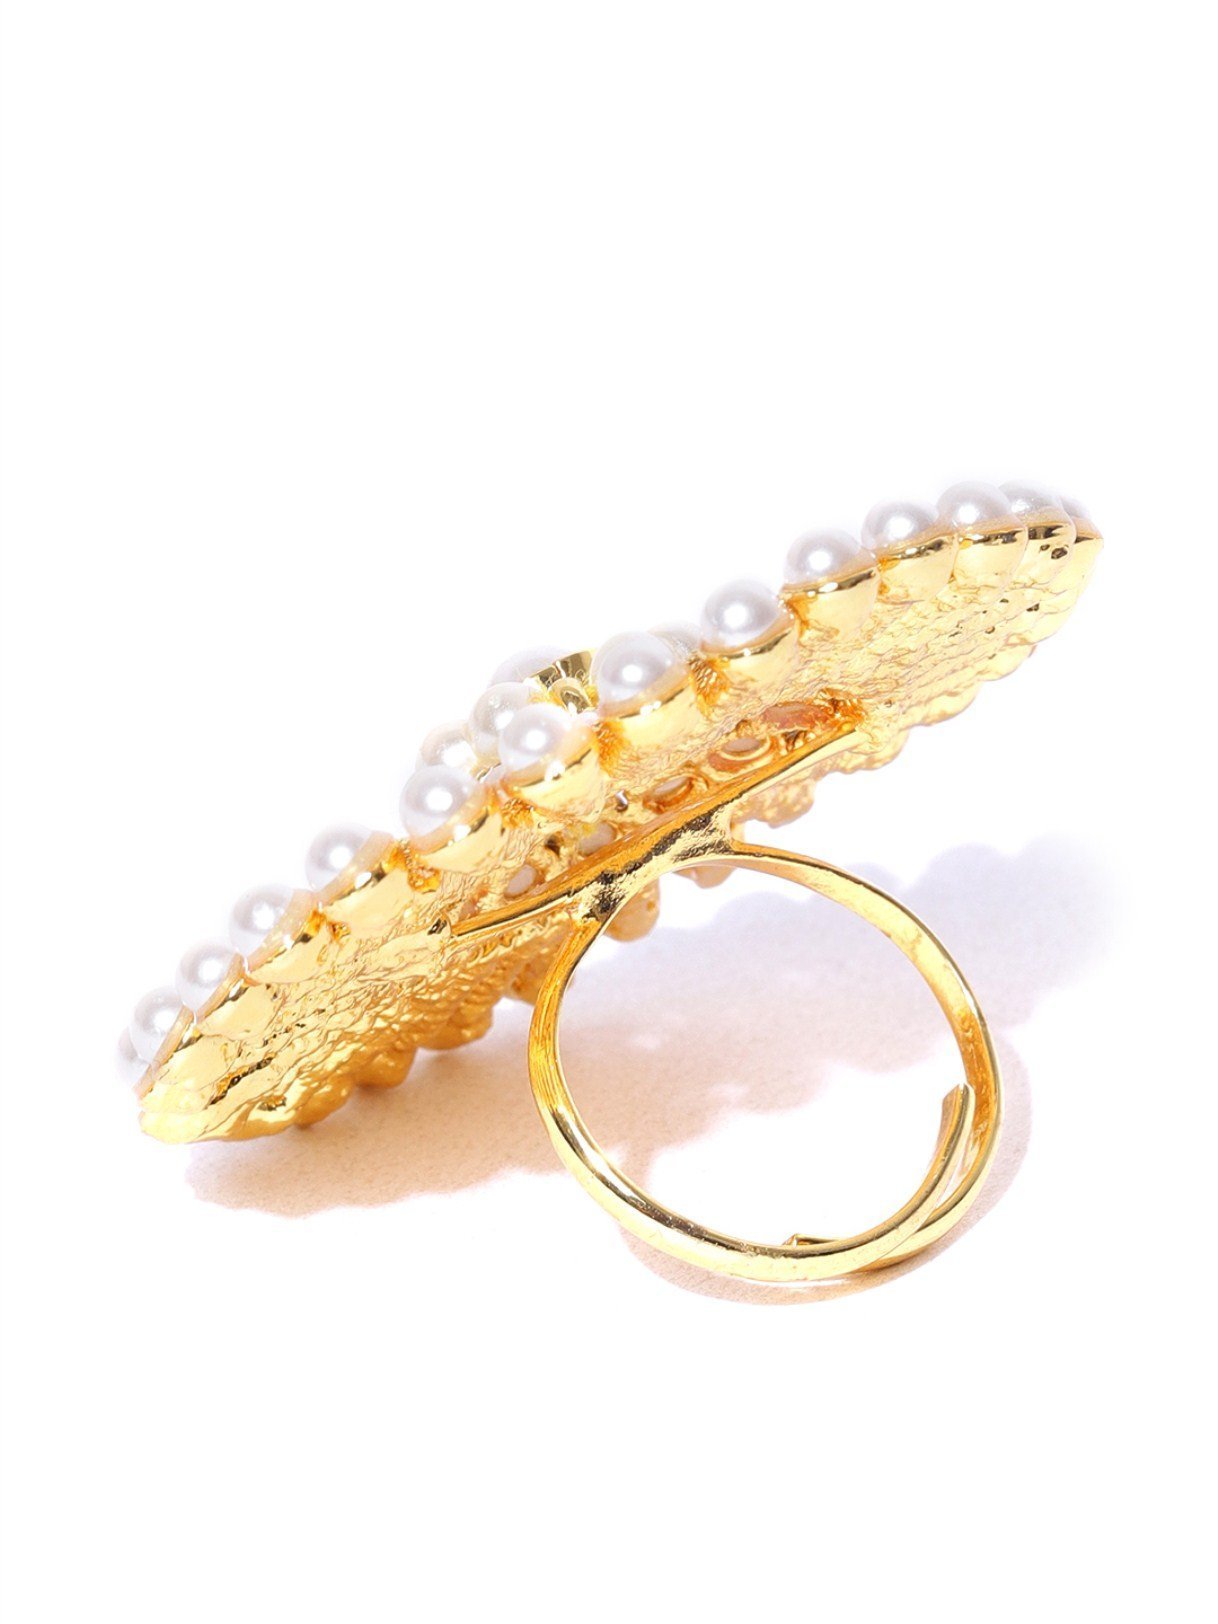 Women's Gold-Plated Pearls Studded Adjustable Ring in Floral Pattern - Priyaasi